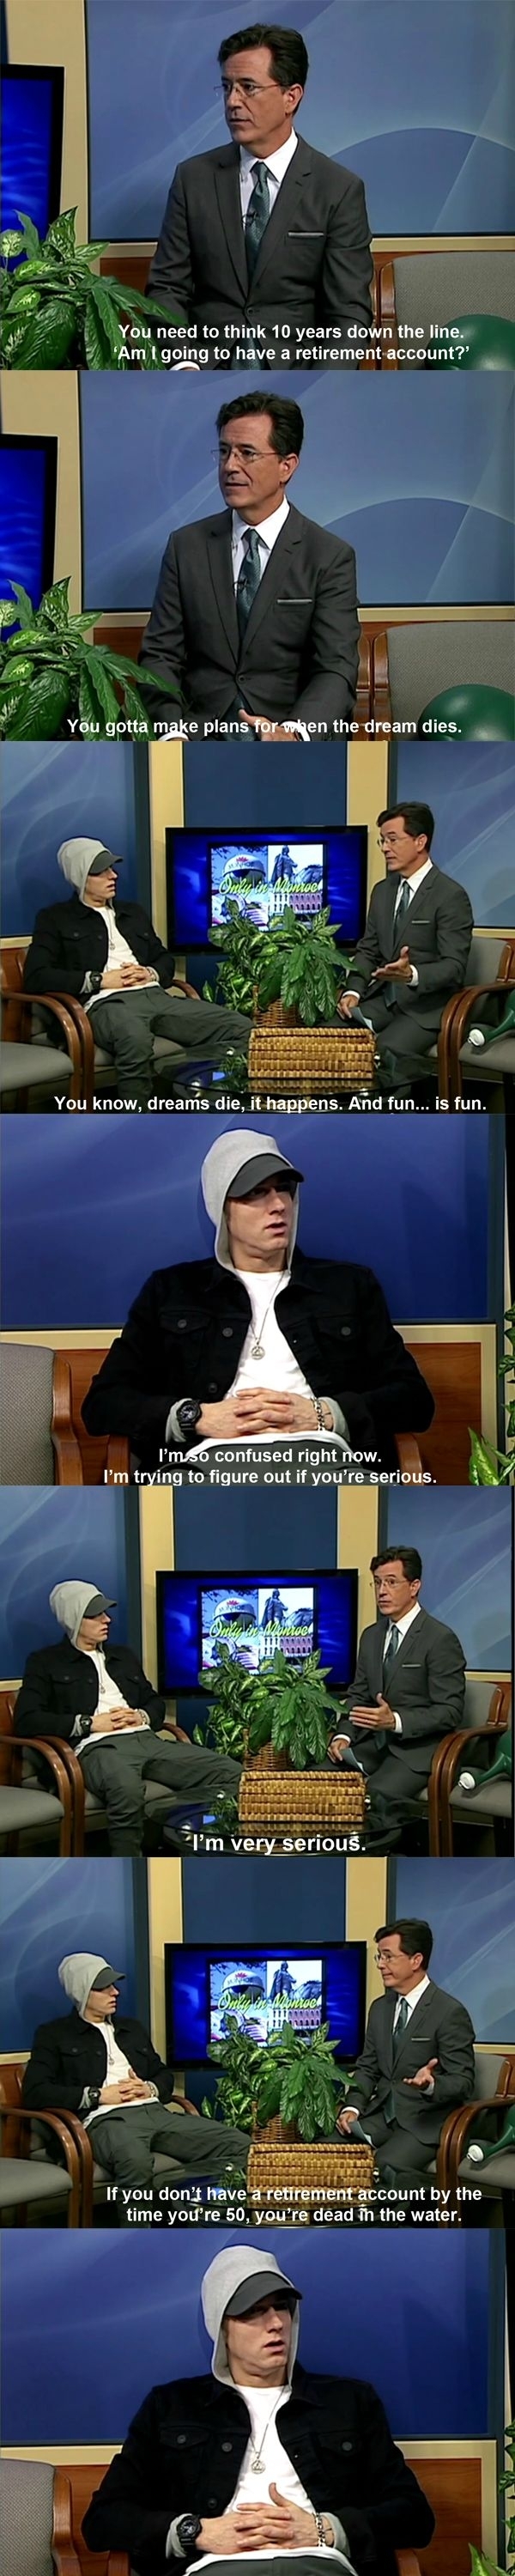 Colbert and Eminem in the same room  gold